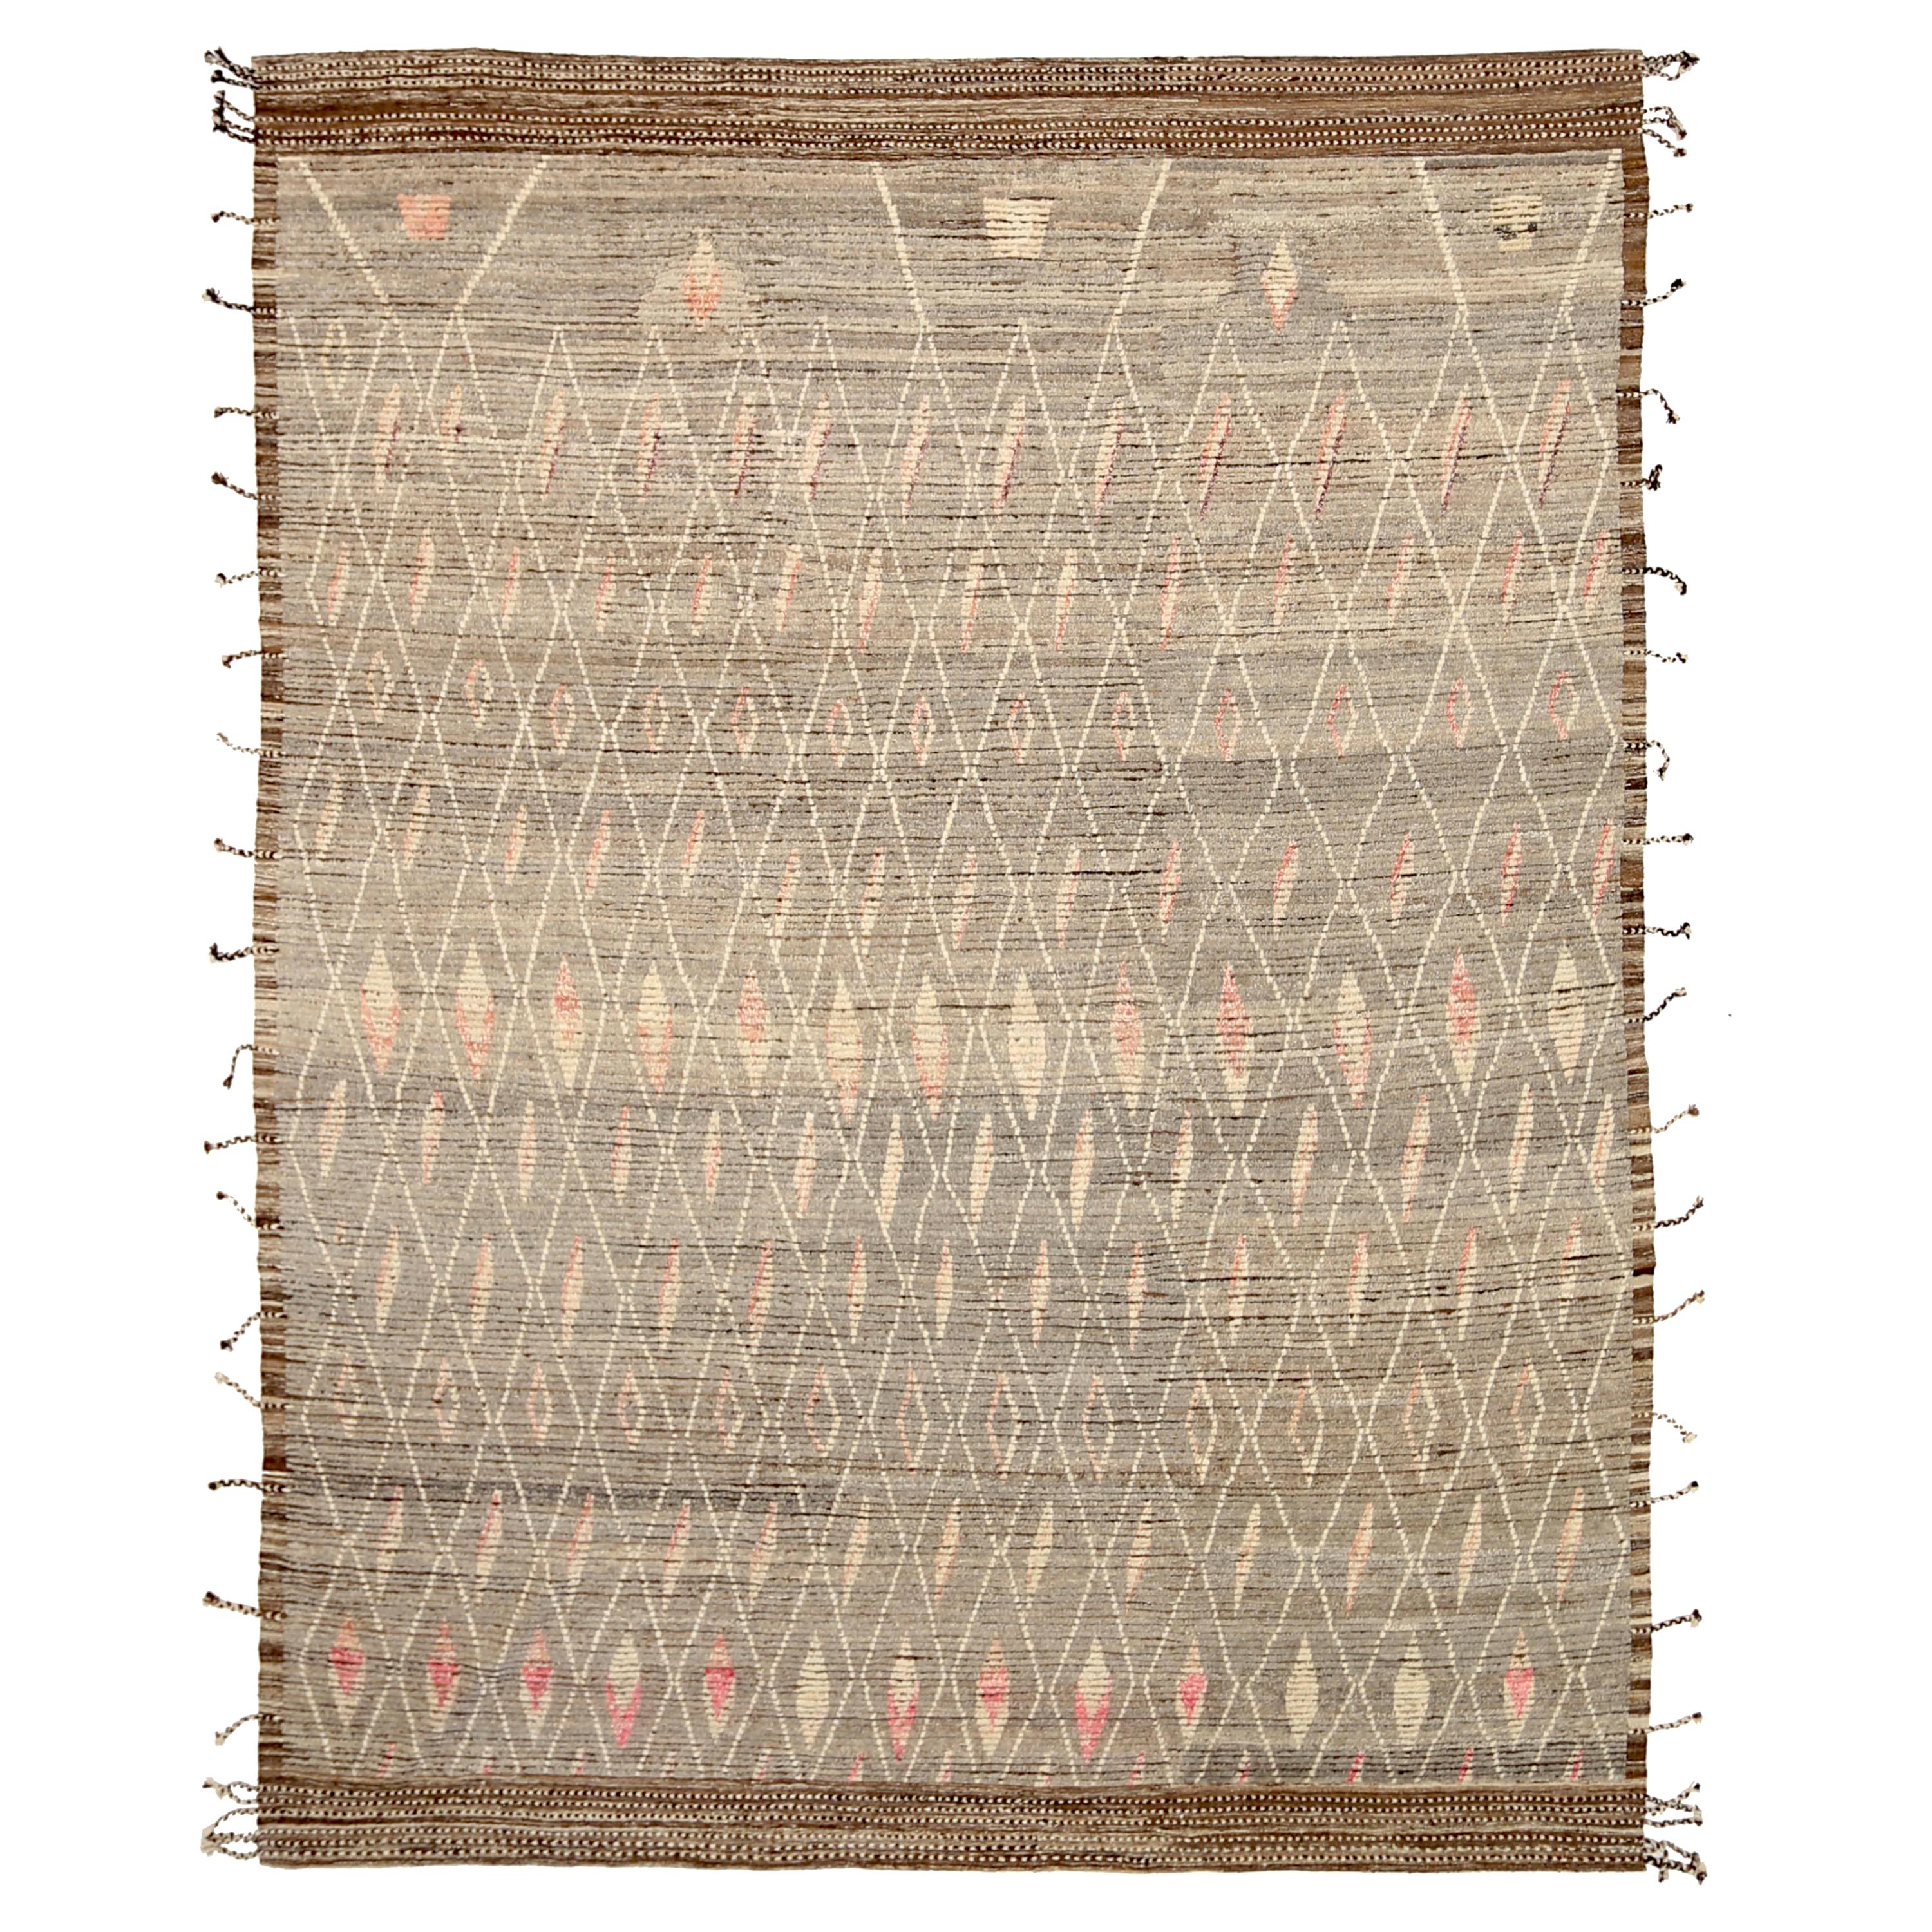 New Afghan Area Rug Moroccan Design For Sale